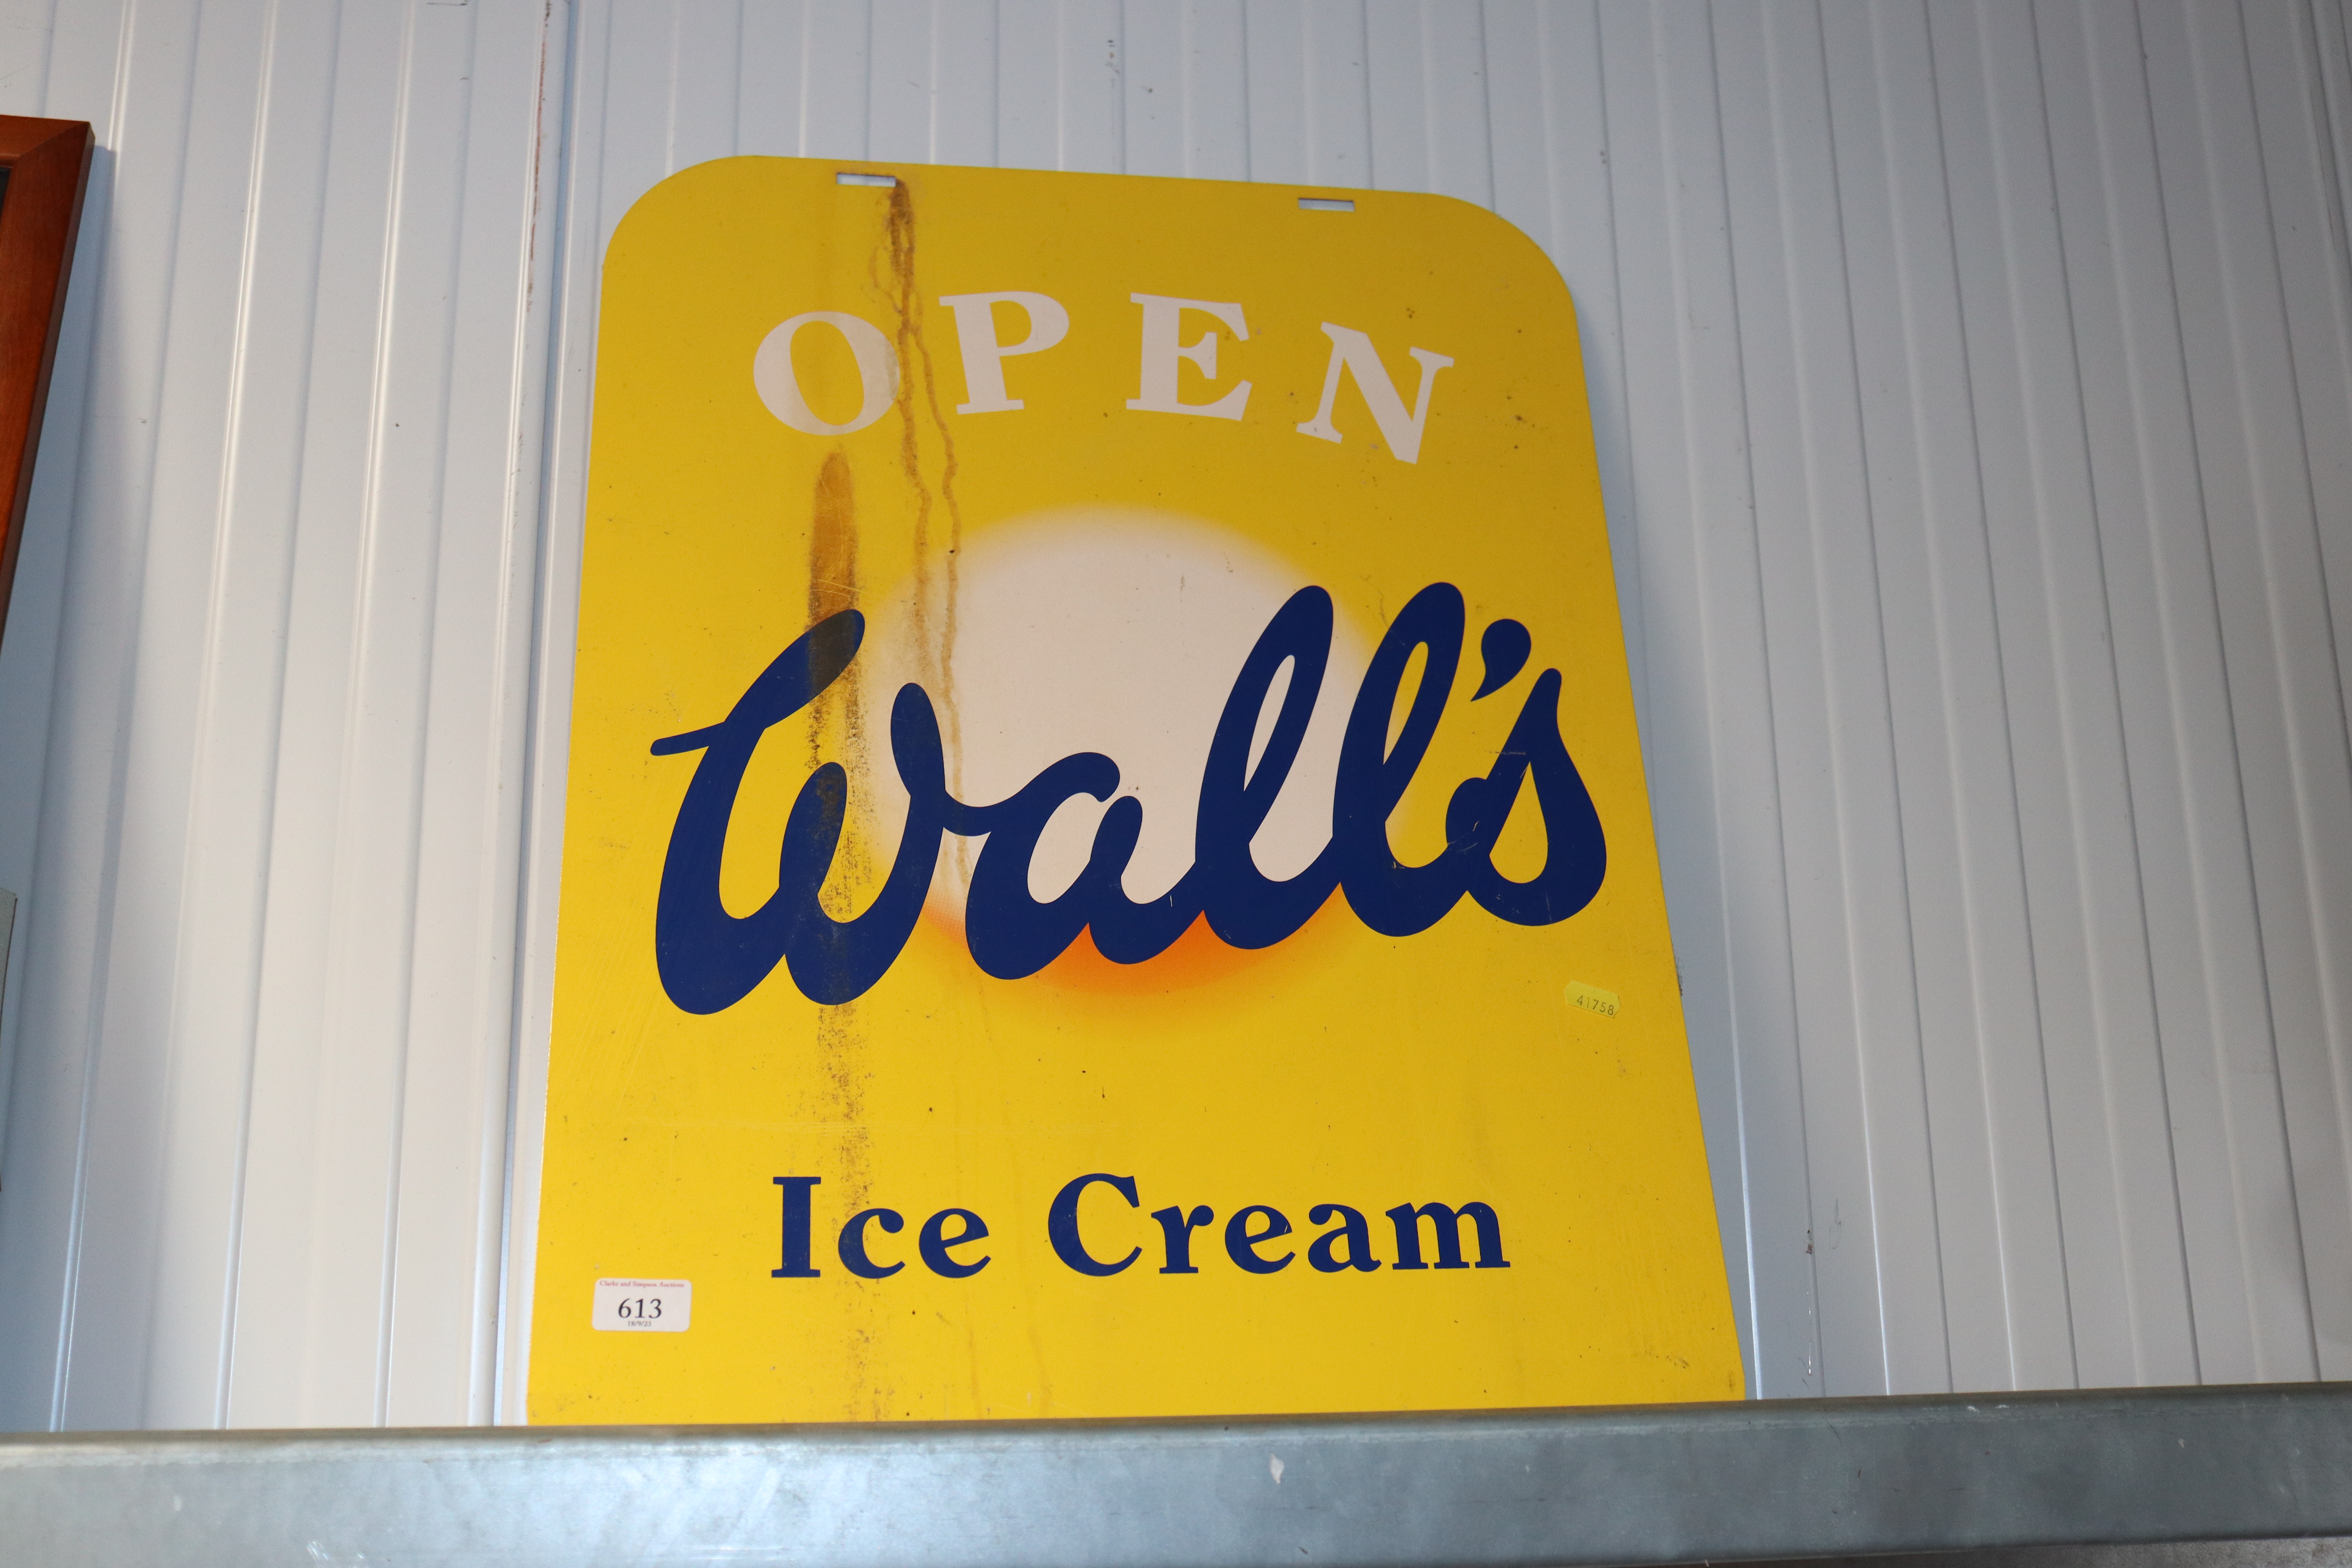 A Walls ice cream advertising sign